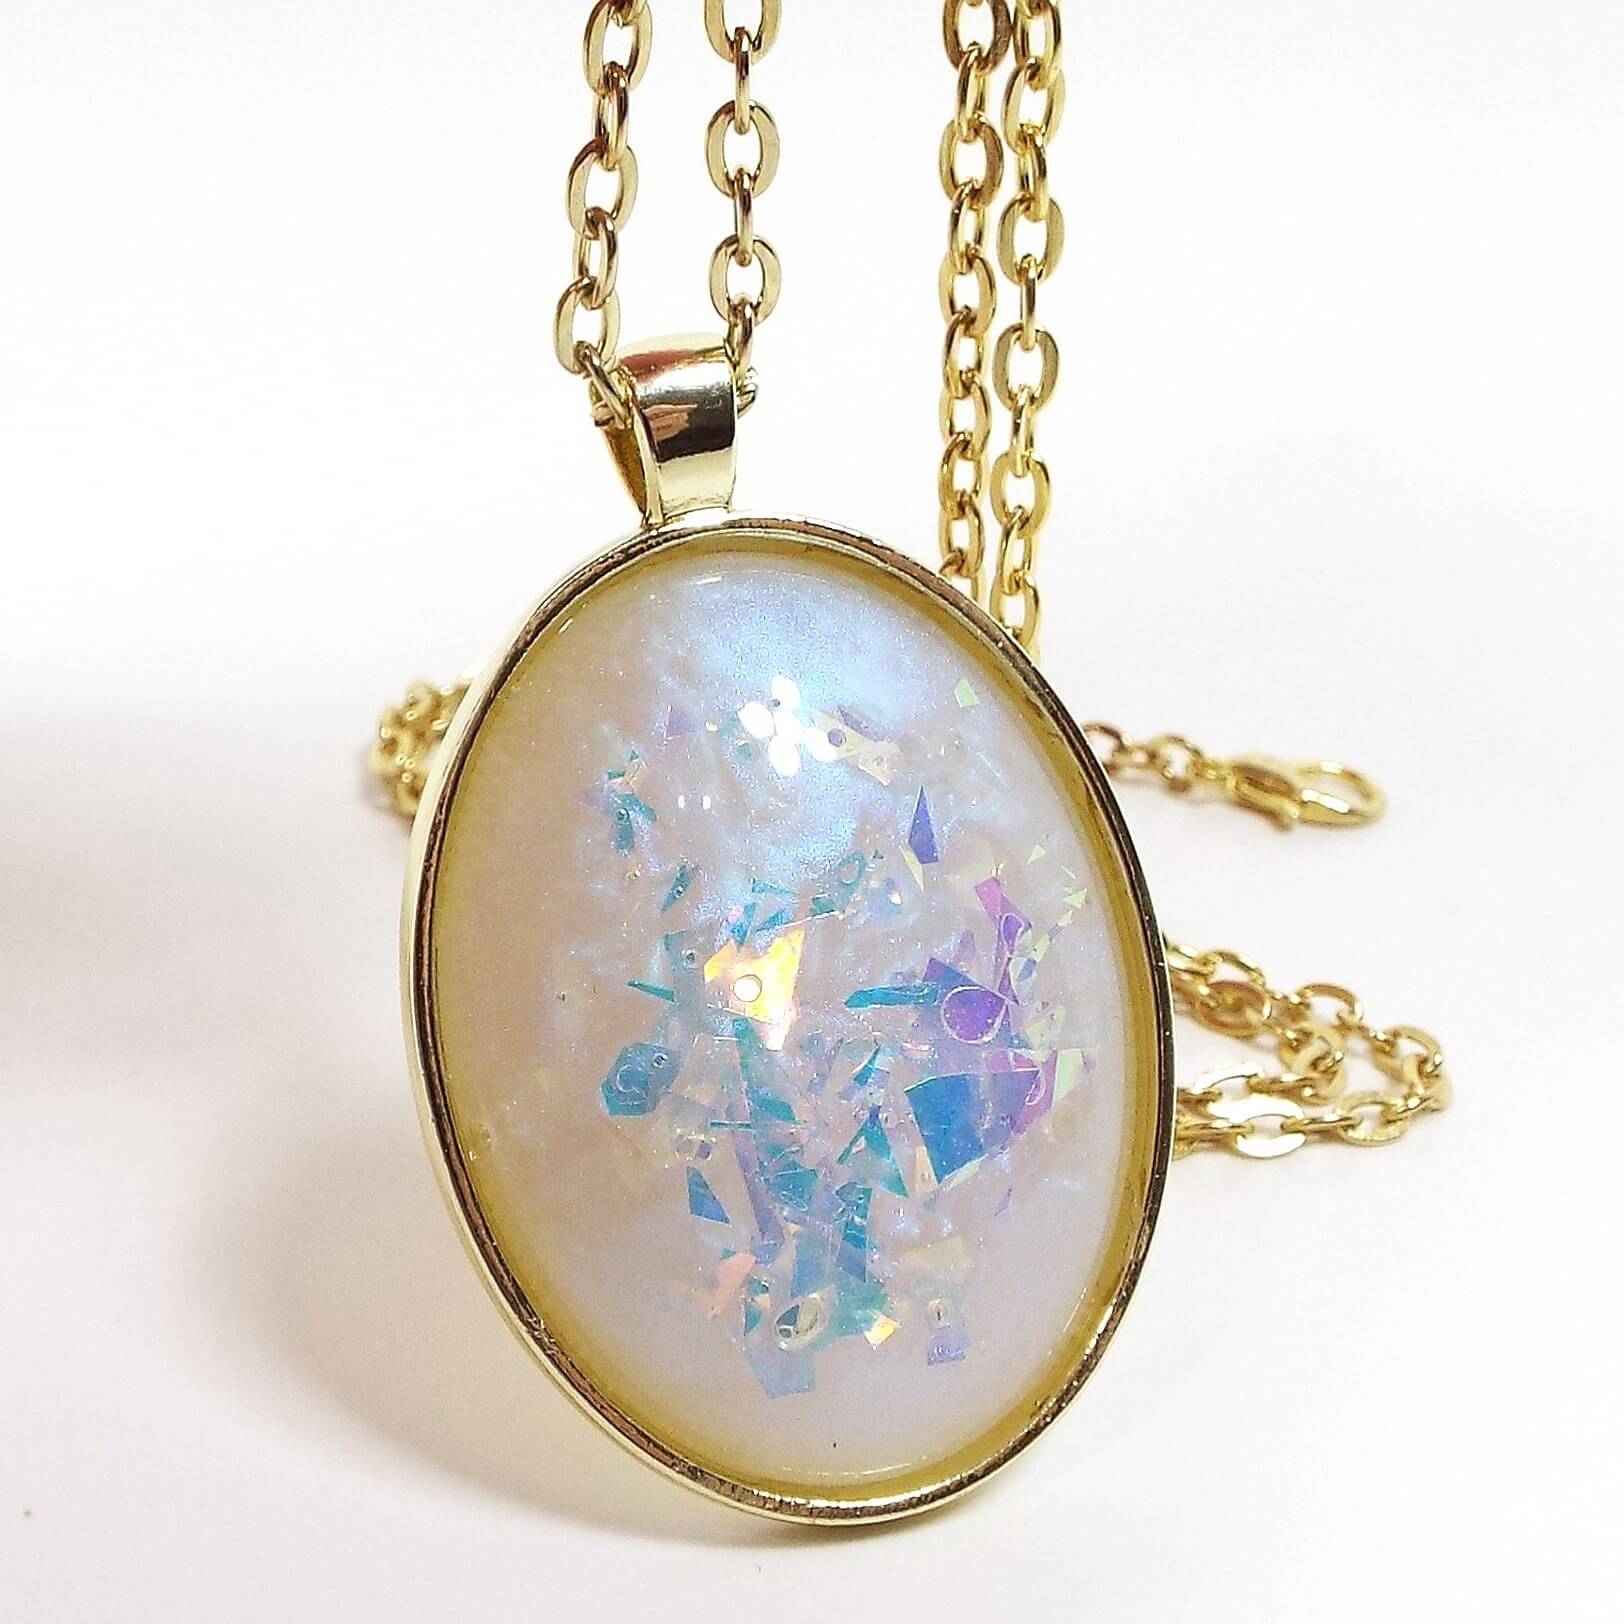 Front view of the handmade oval resin pendant necklace. The metal is gold tone in color. The oval pendant has a domed cab with color shift resin that has shades of pearly off white and blue. There are large chunks of AB glitter with blue, purple, and pink hues showing inside the resin for flashes of color.